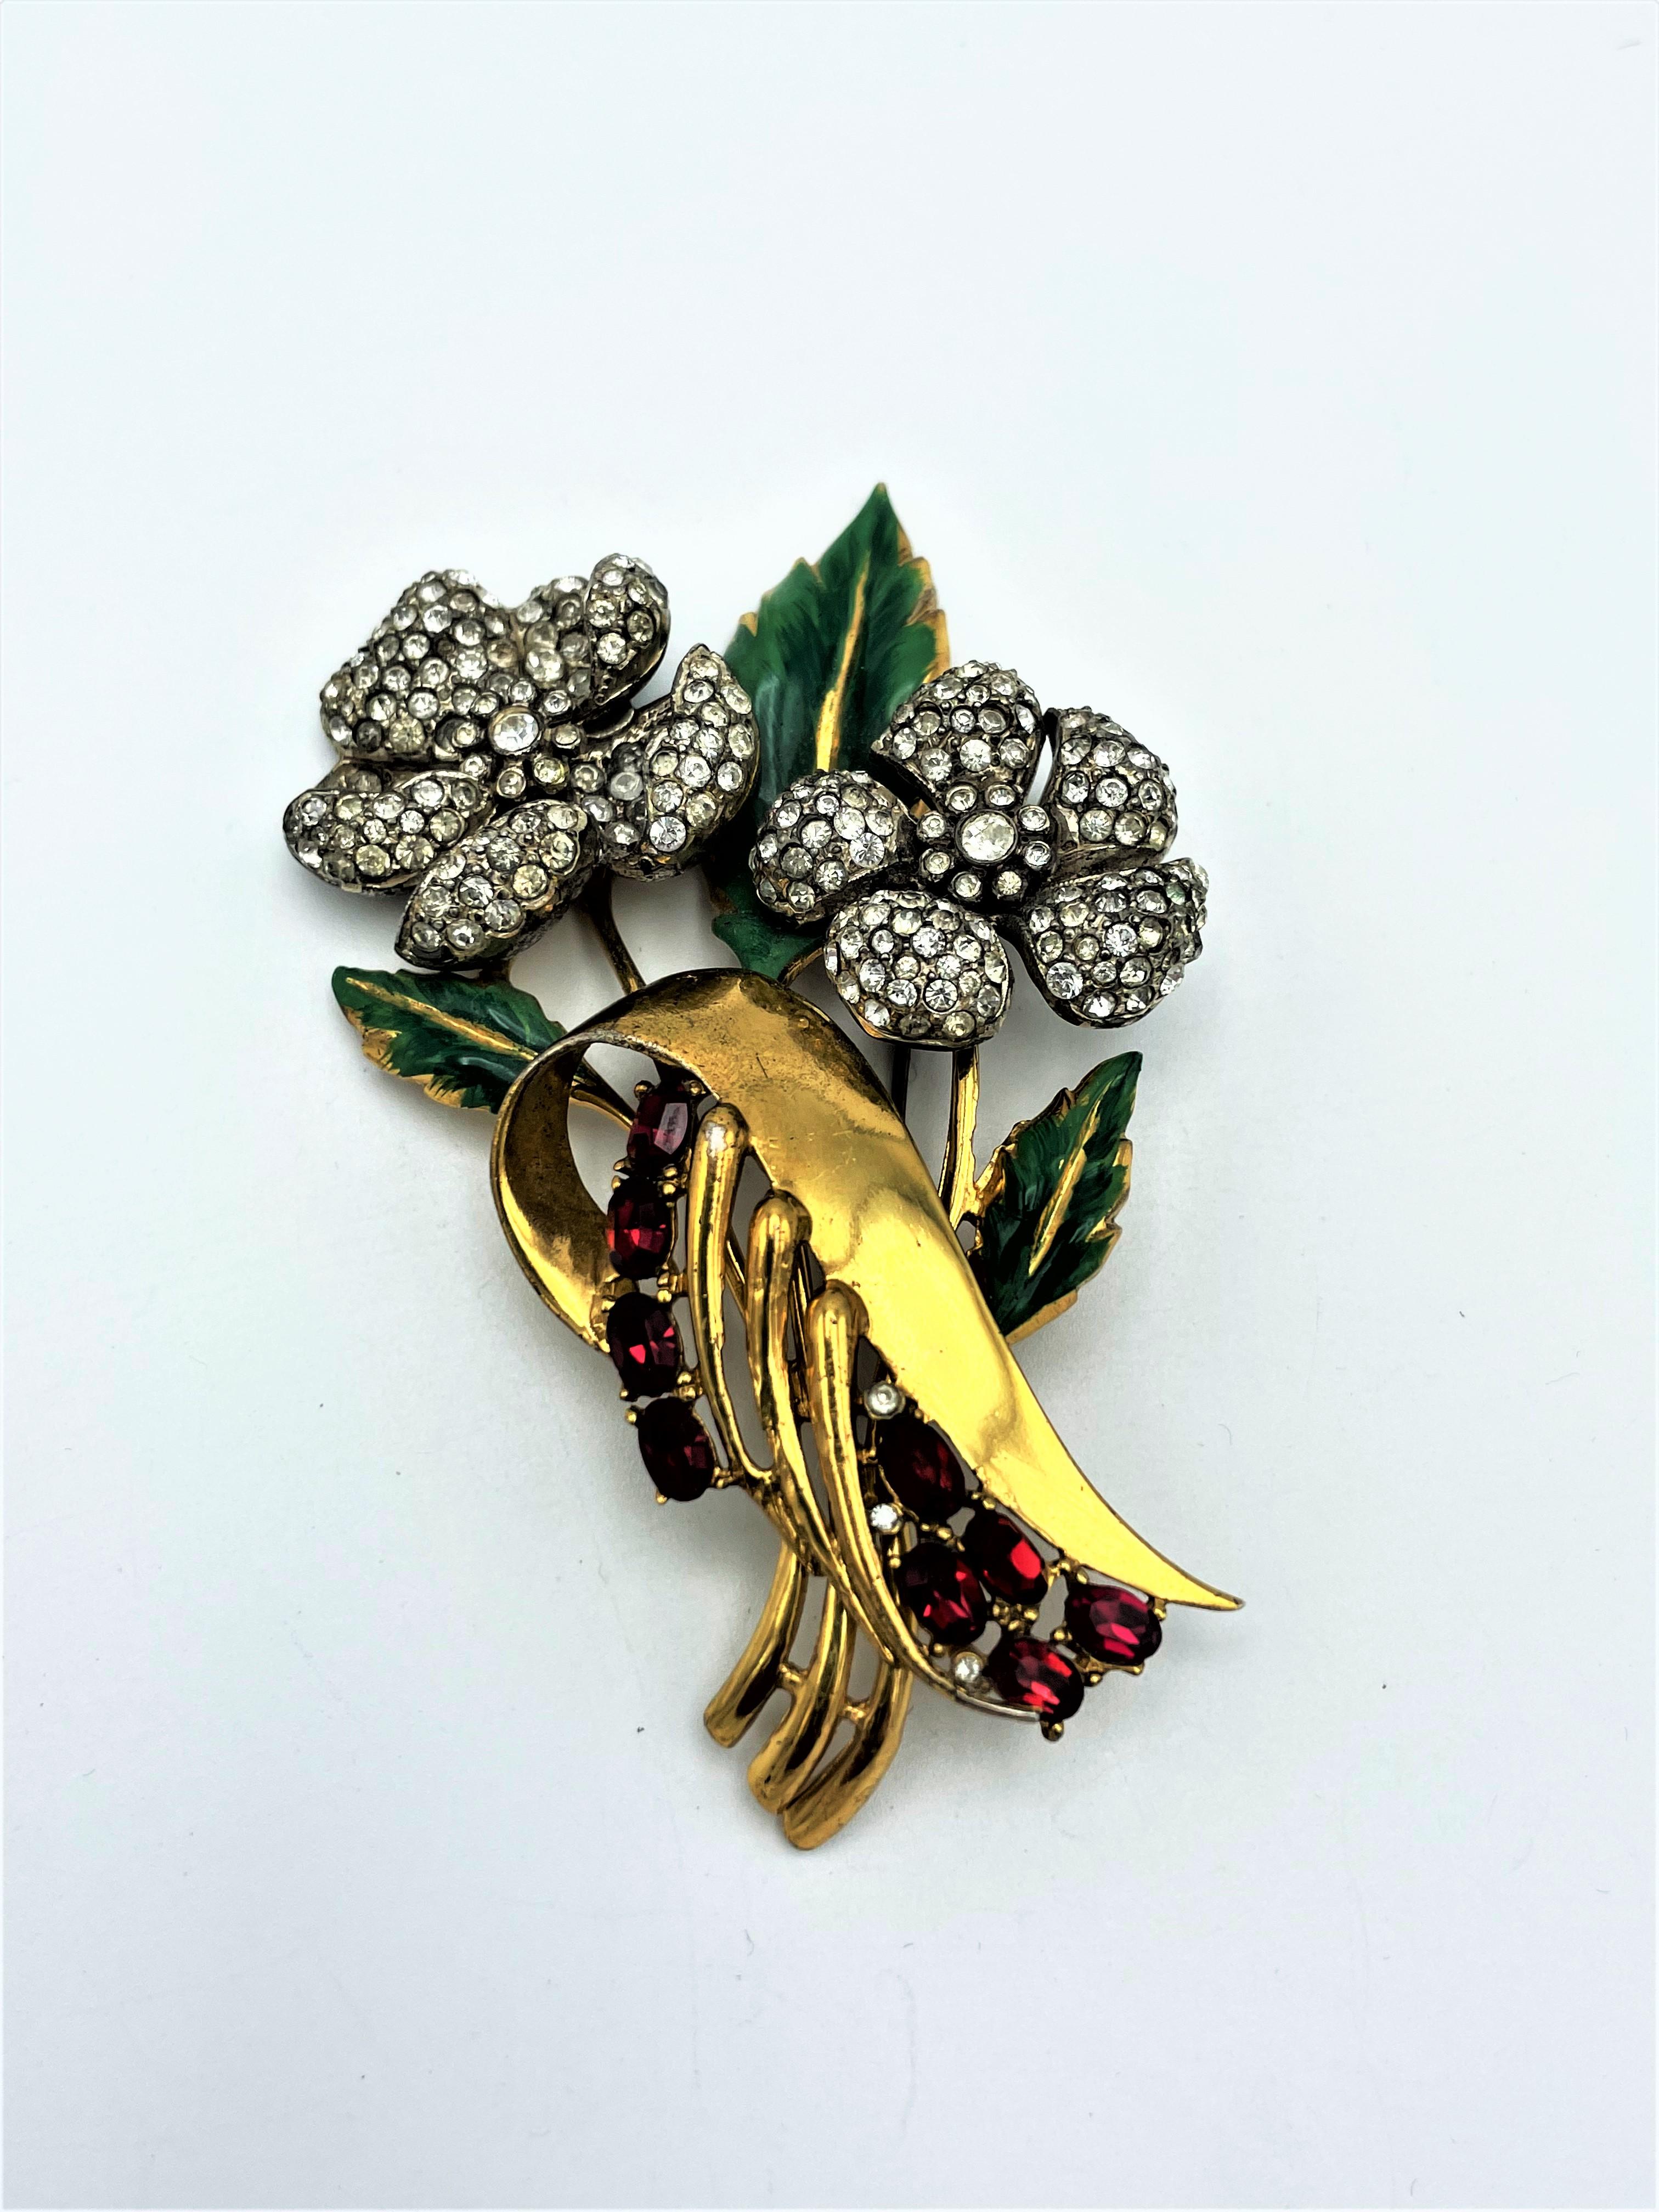 
This beautiful large flower brooch by CoroCraft 1940s USA, with two rhinestone flowers, enameled leaves and red rhinestones. The brooch is made of silver and 24 carat gold plated. Marked  on the back.

Size: H 9 cm x W 6 cm, flower 3 cm x 3 cm. No